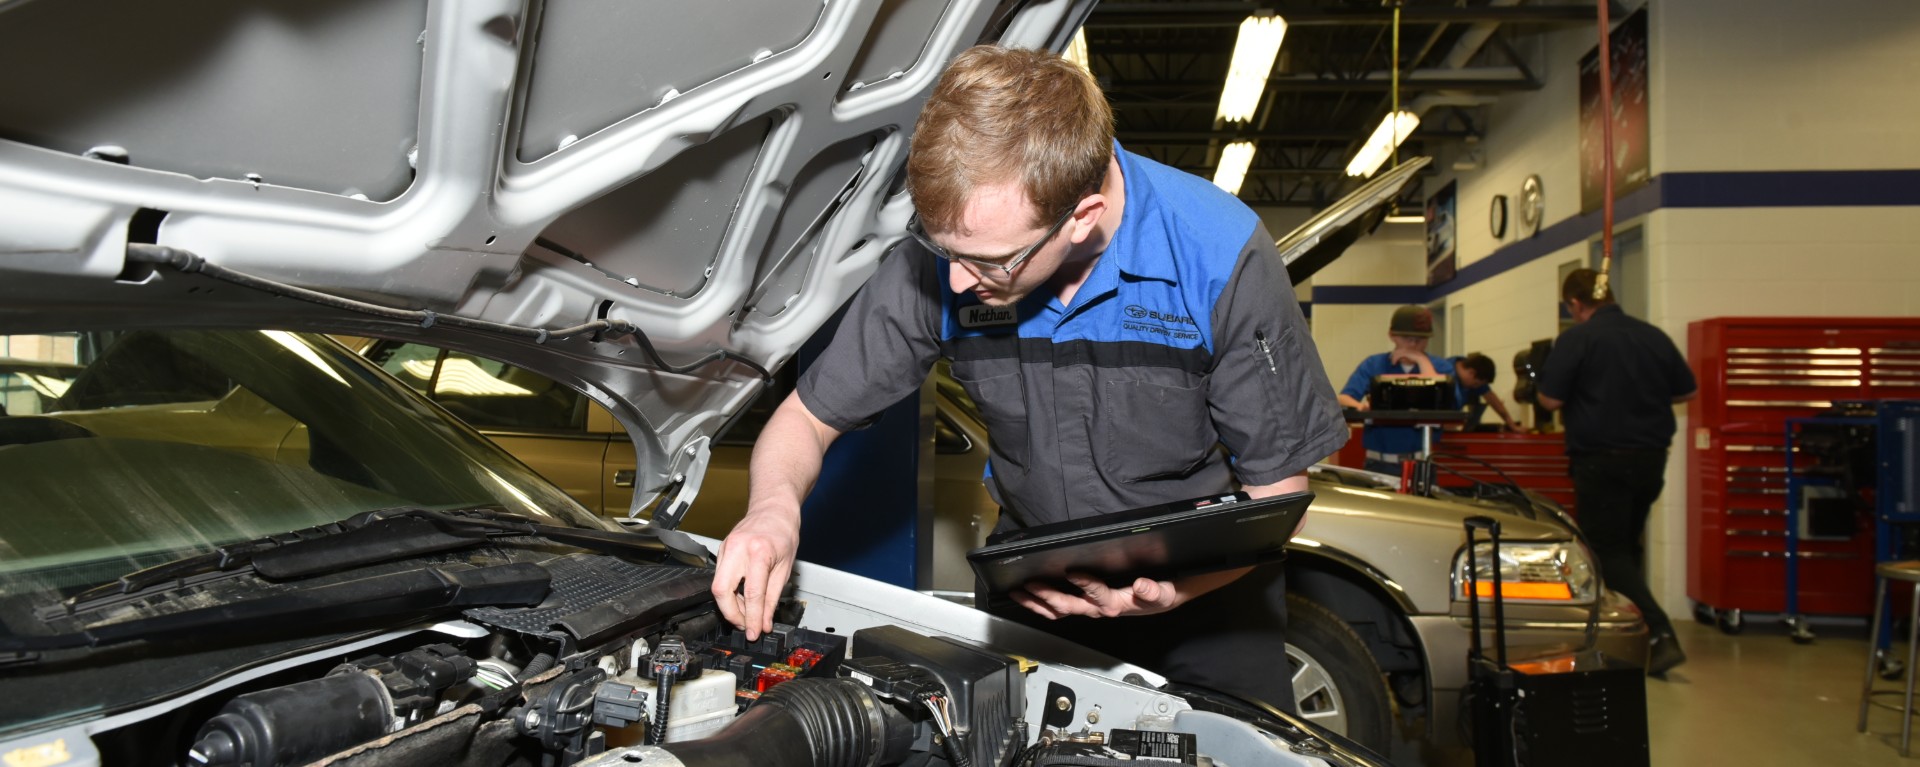 automotive student looking under the hood